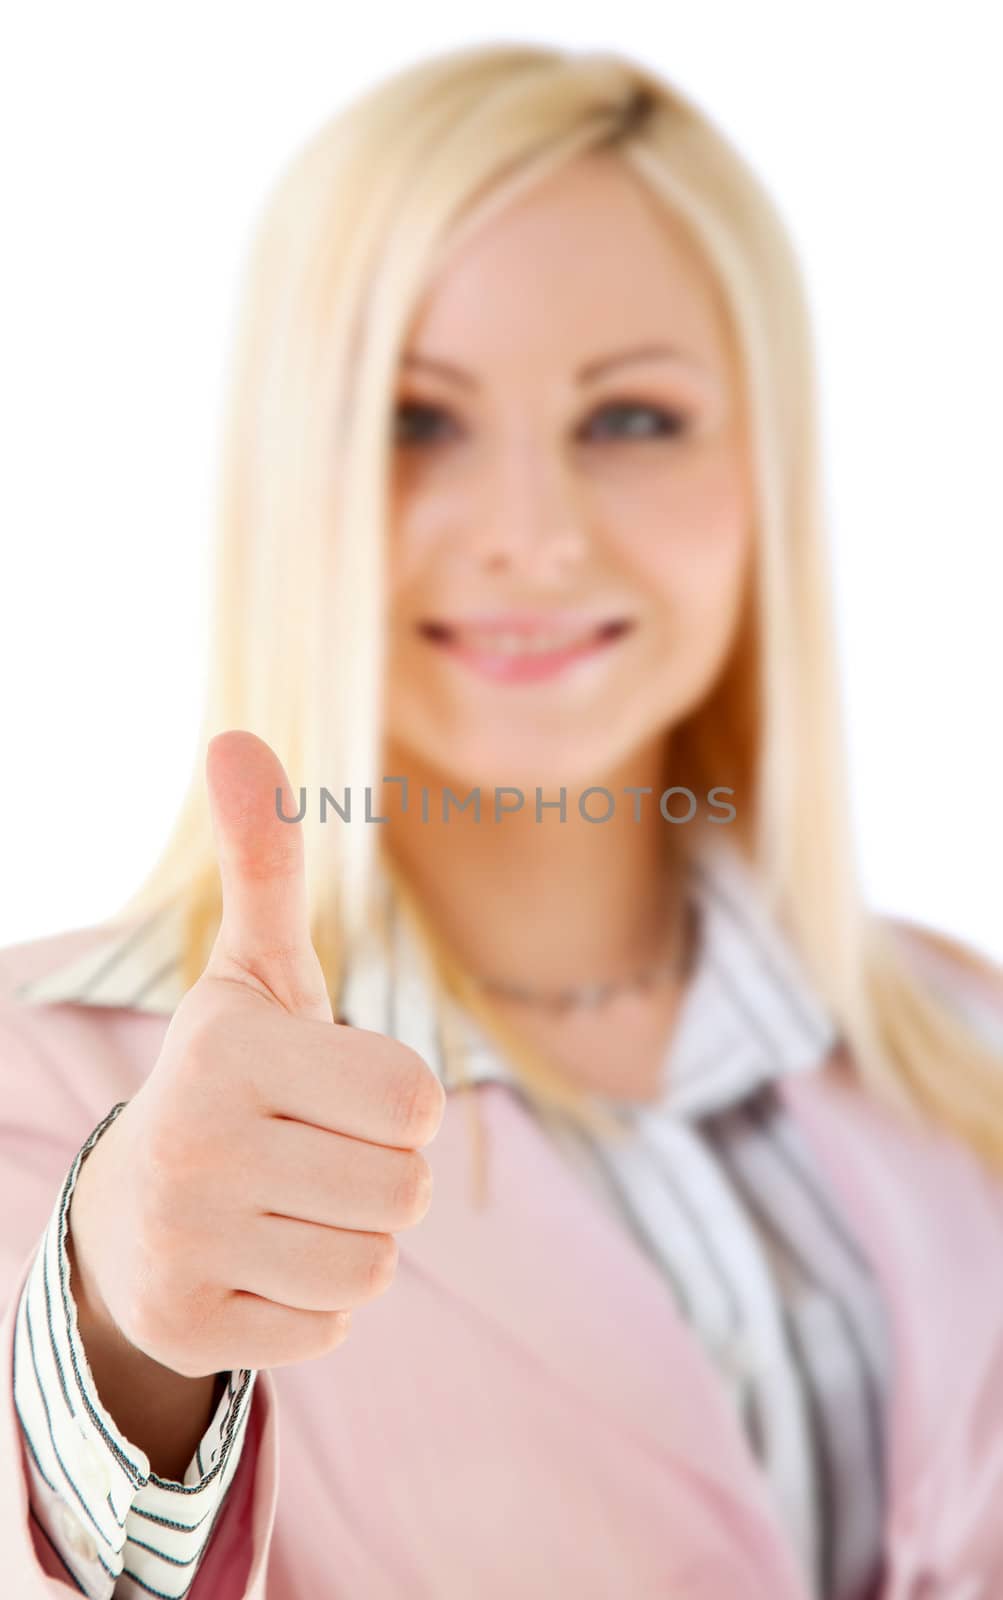 Happy blond female showing thumbs up sign, isolated, focus on hand